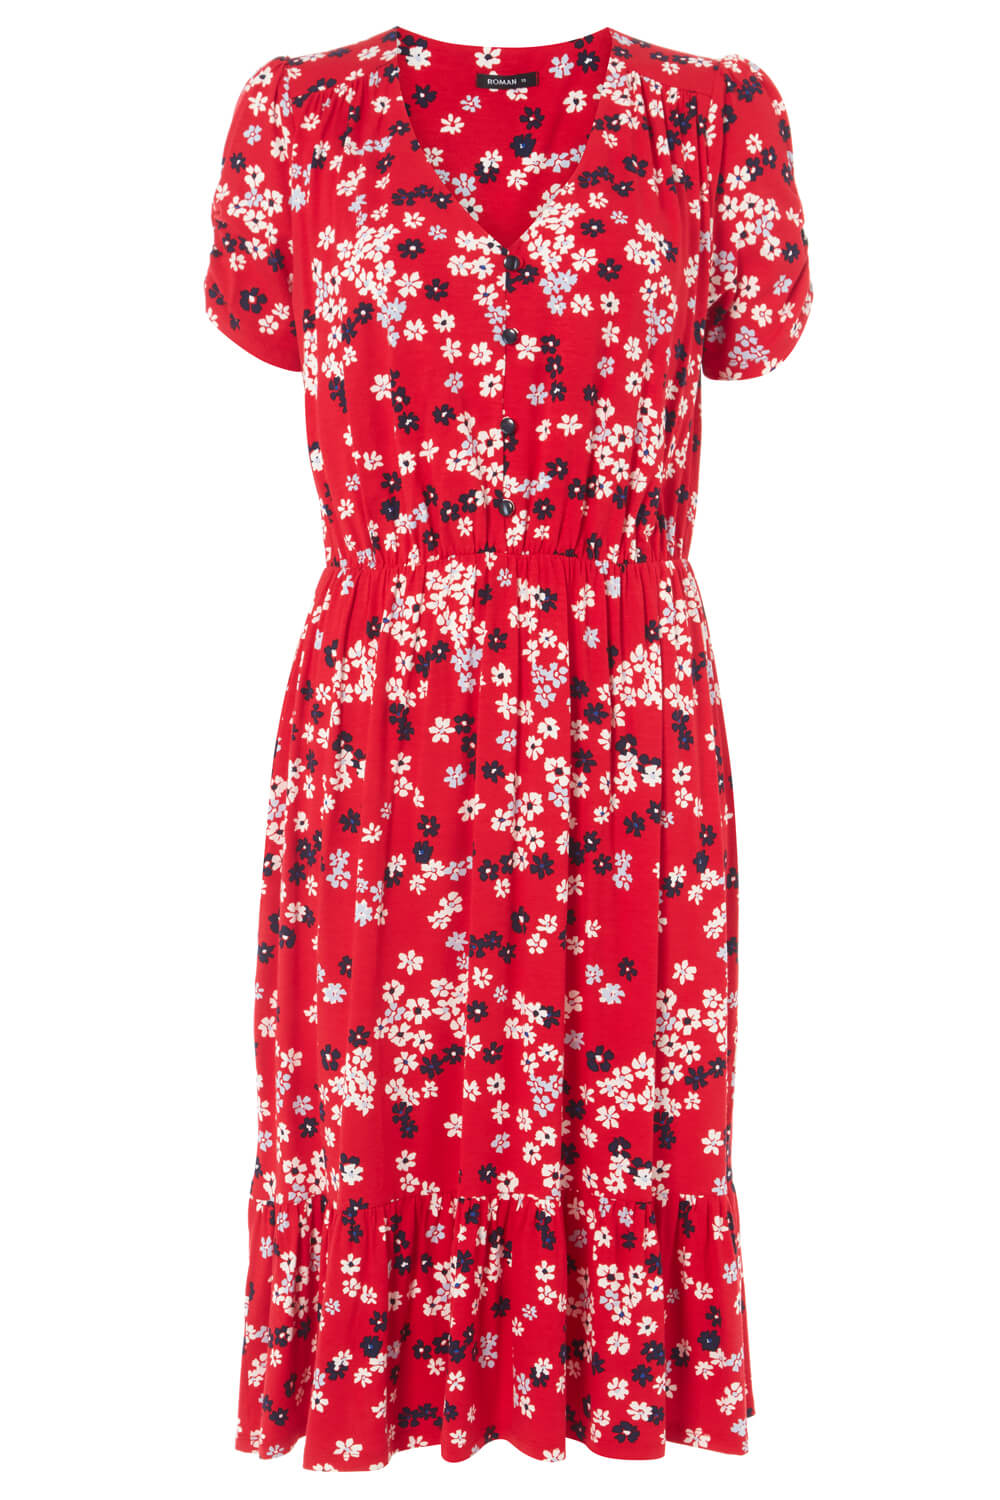 Red Floral Print Tiered Midi Dress , Image 5 of 5